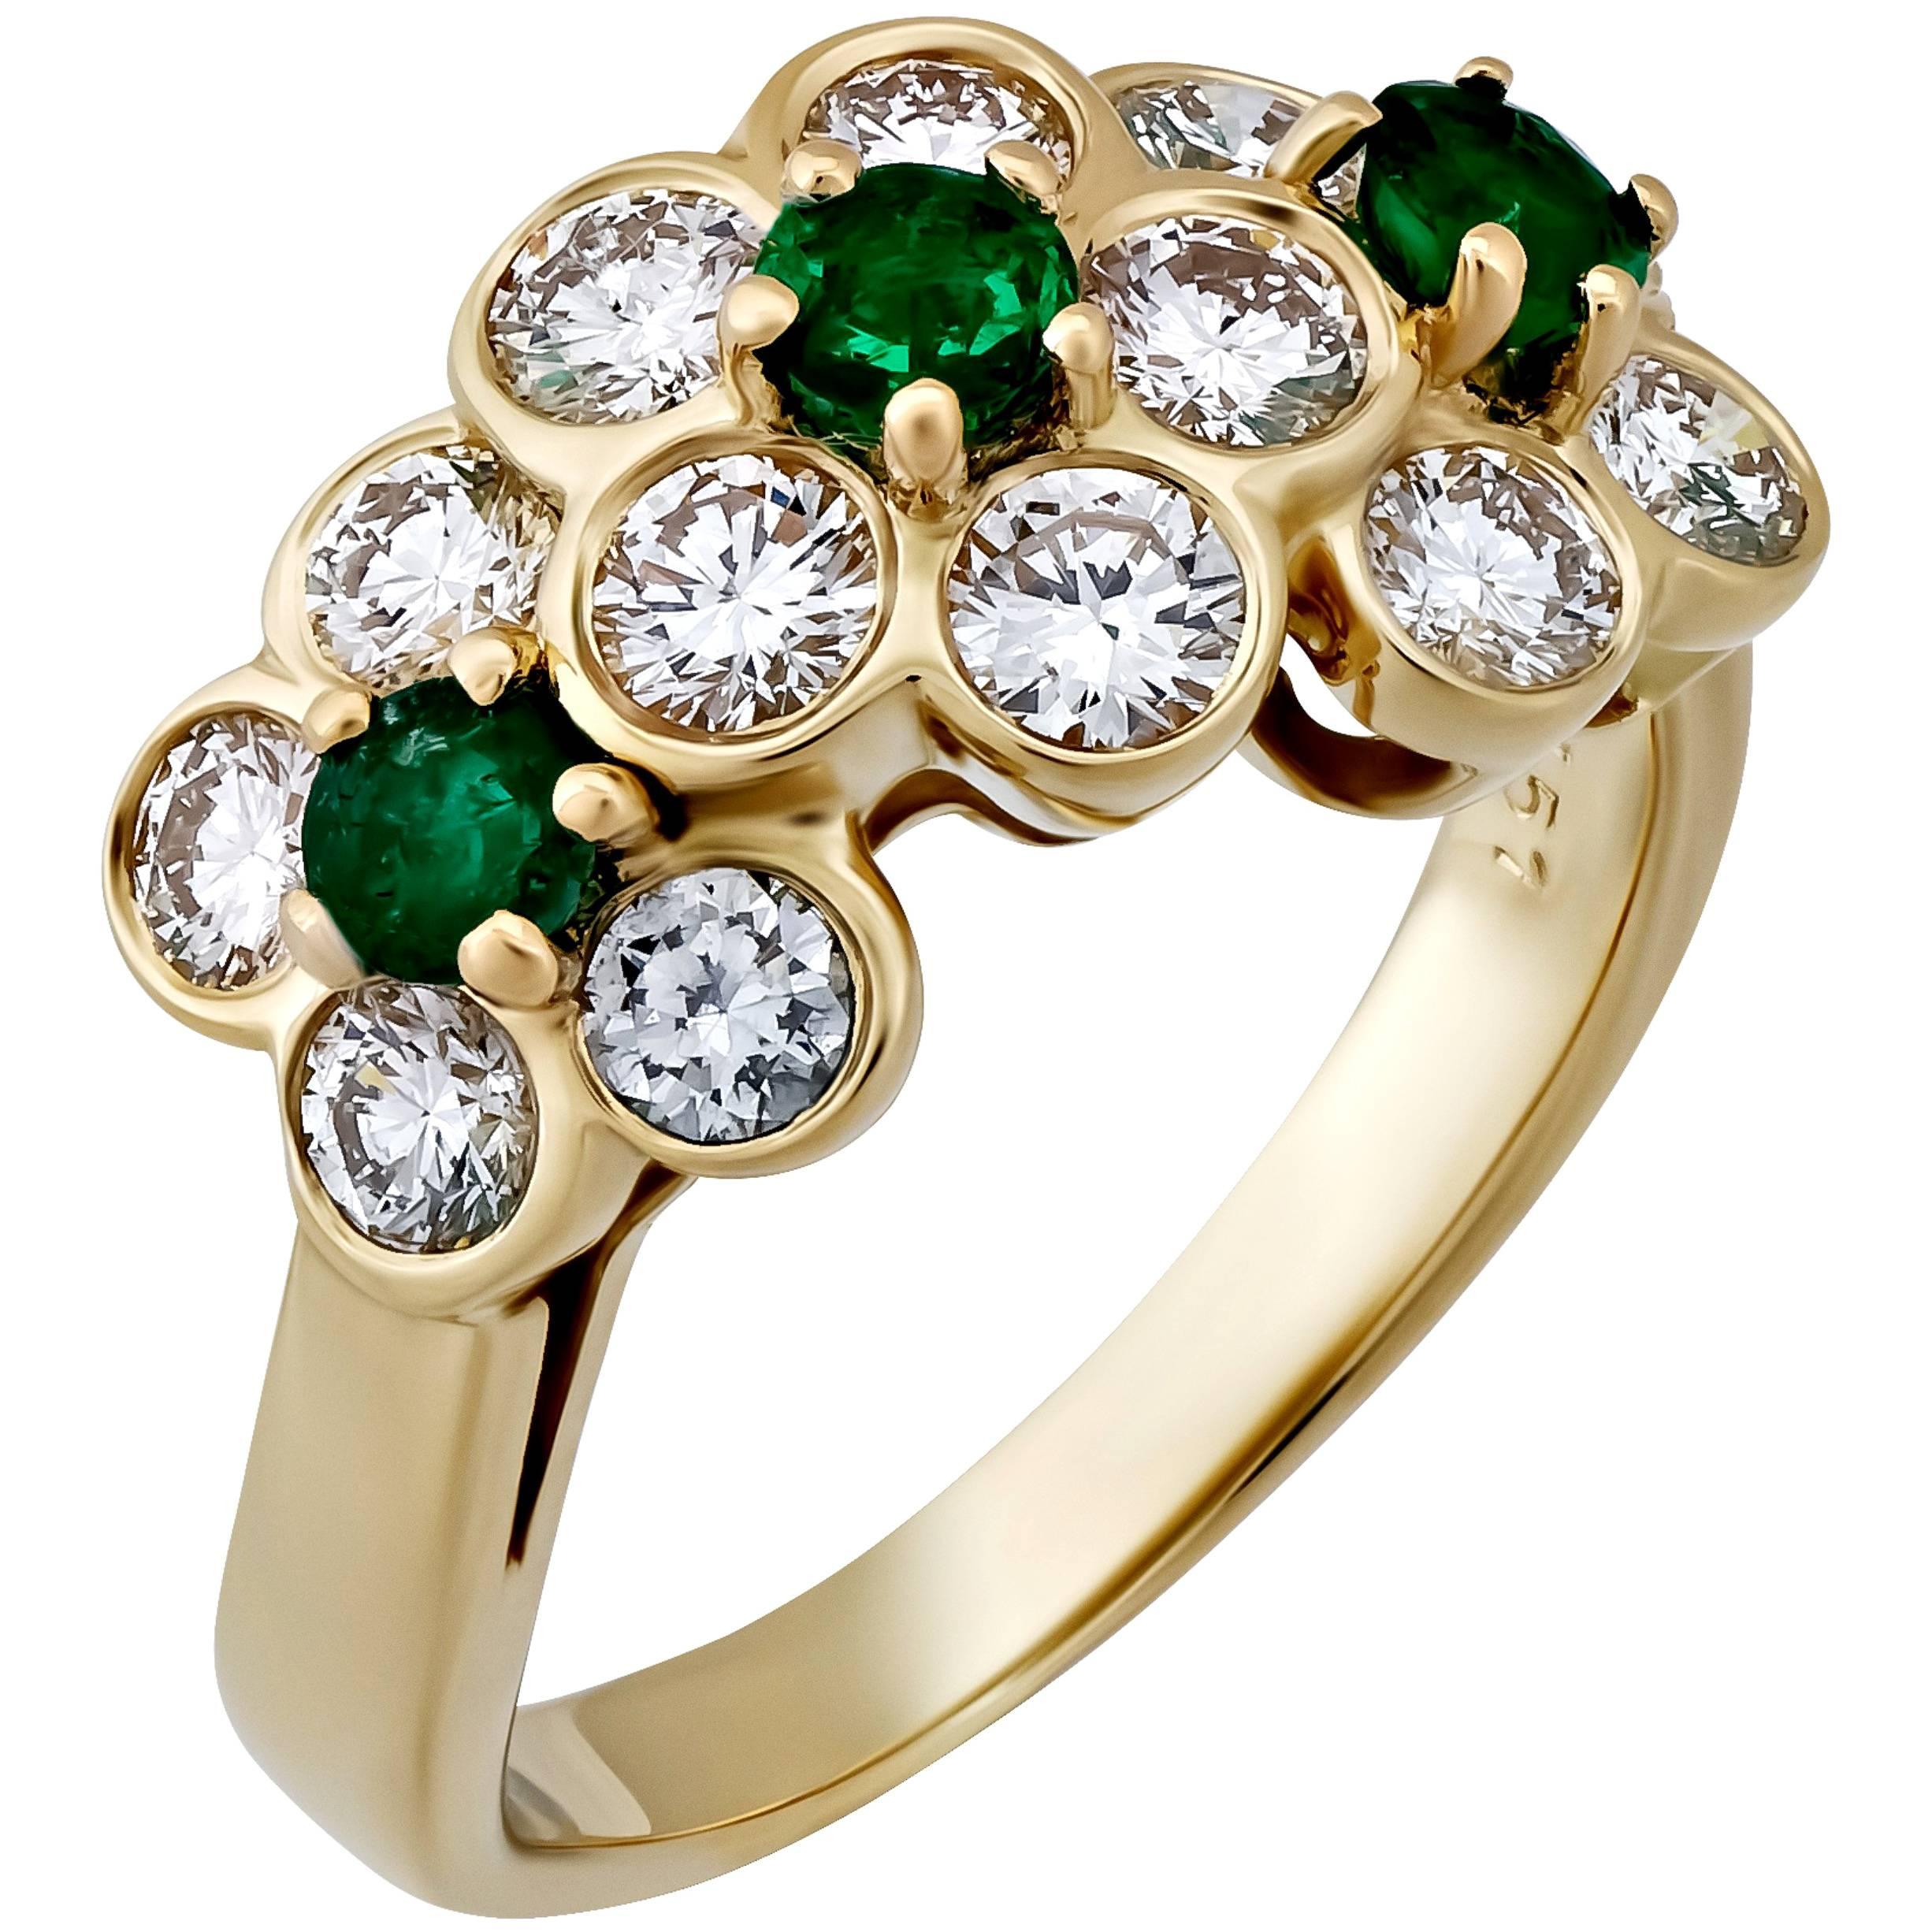 Van Cleef & Arpels 18K Yellow Gold Diamond and Emerald Floral Ring Size: 5